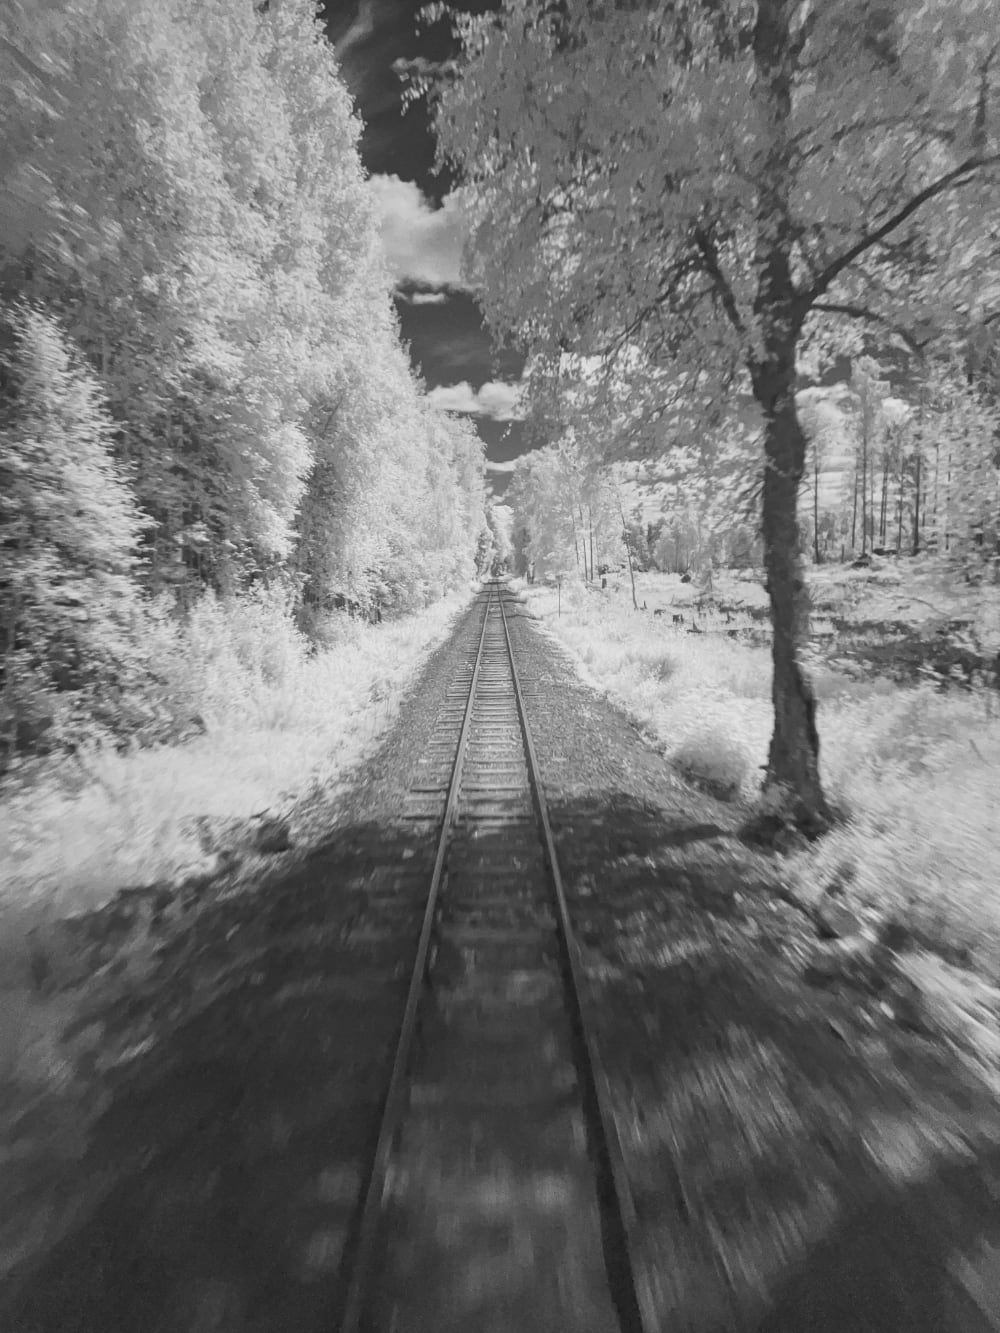 motion blurred black and white Infrared image from the back of a train showing the train tracks.